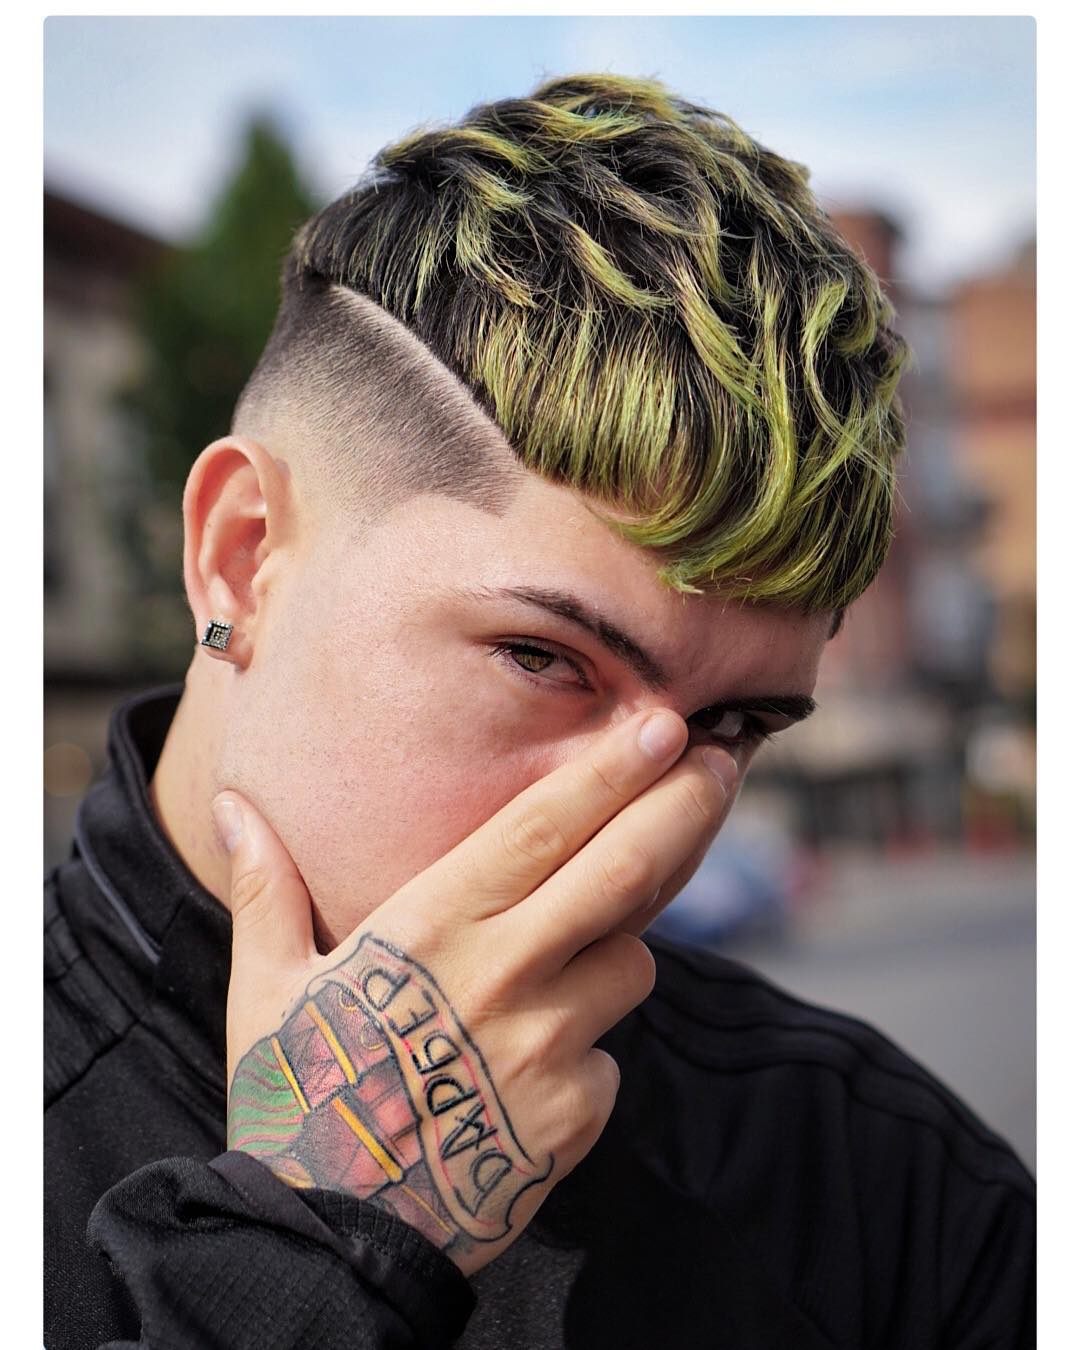 z_ramsey color wavy crop latest mens hairstyles 2018